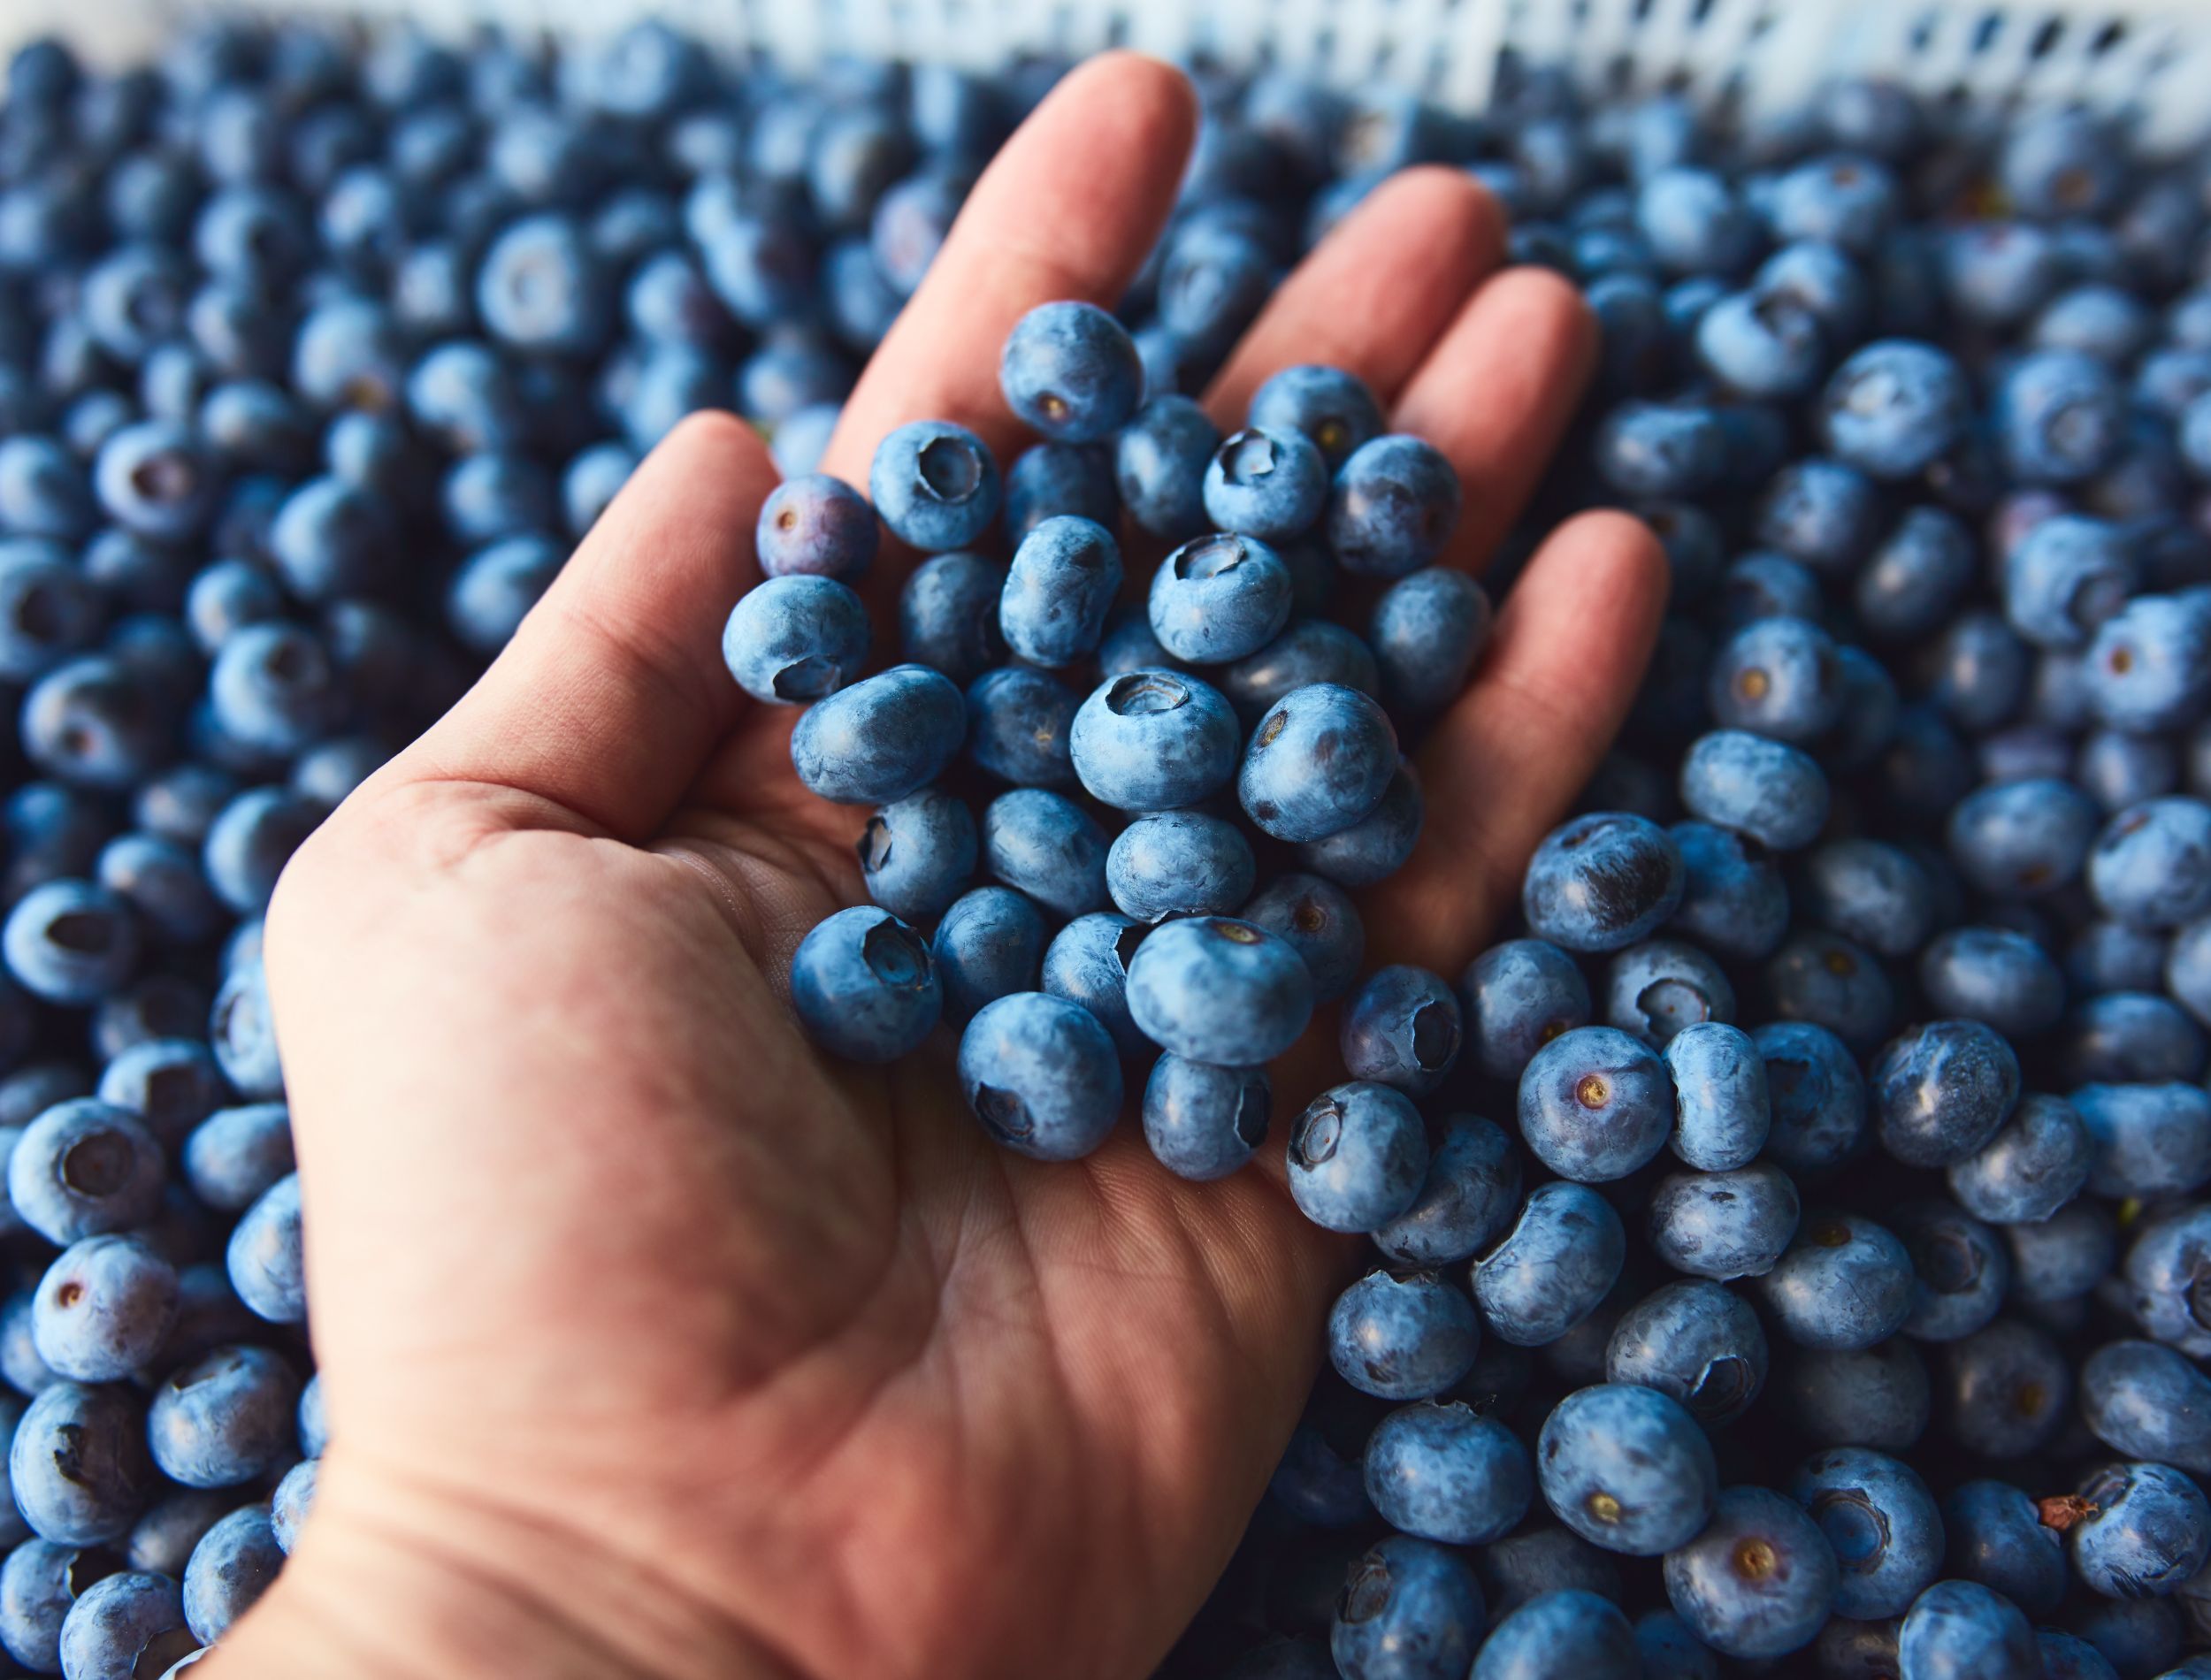 Blueberries in hand